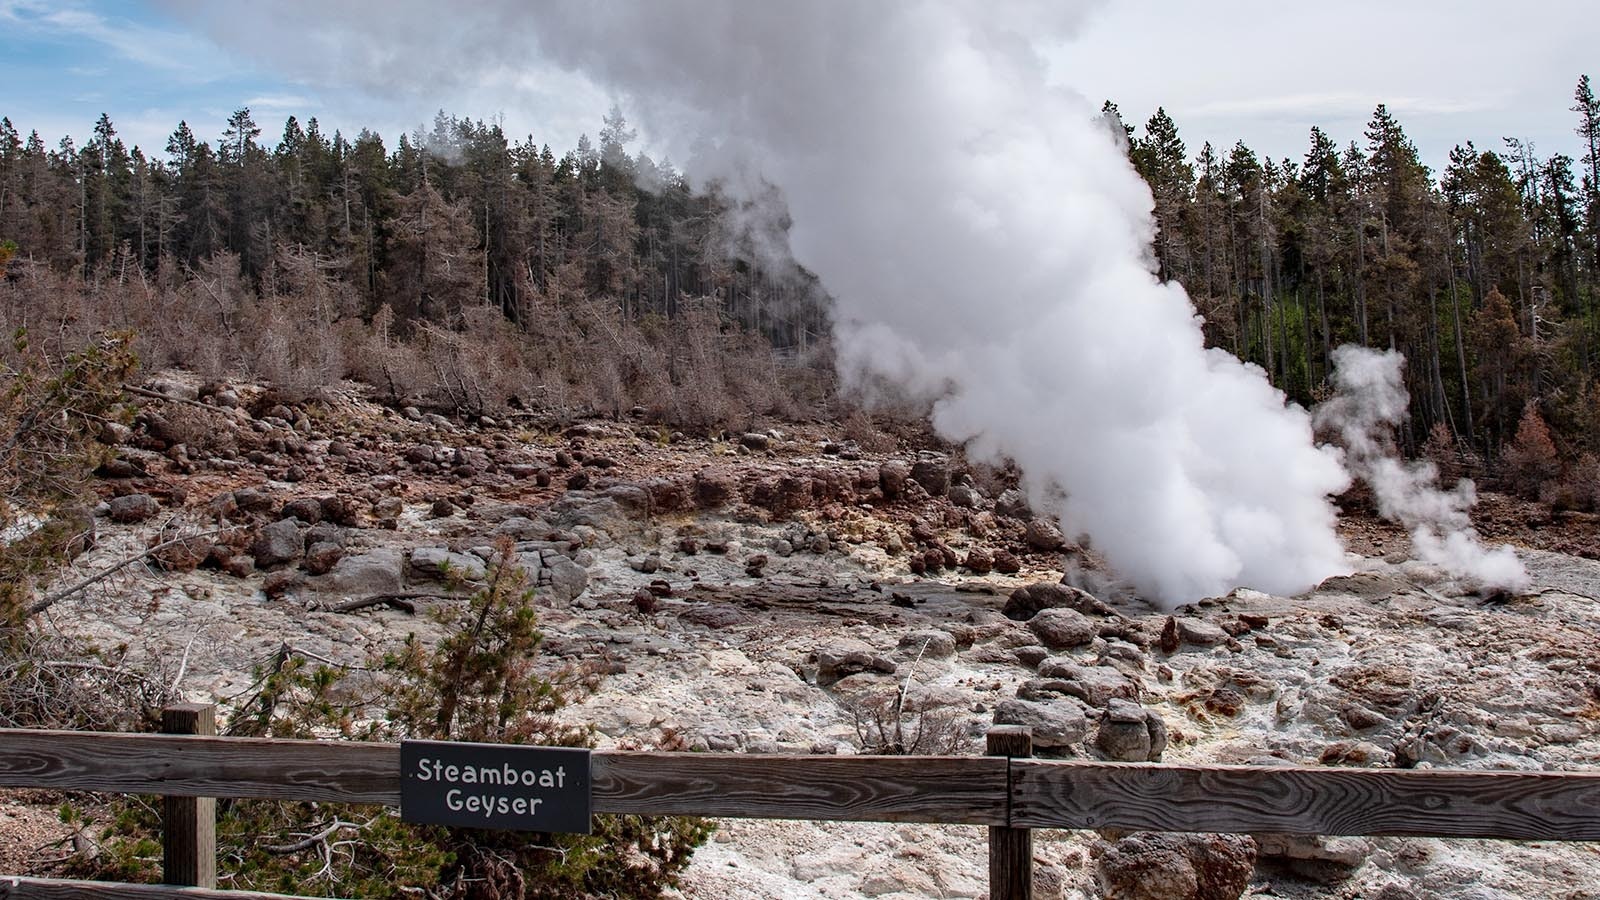 Steamboat Geyser in Yellowstone National Park.